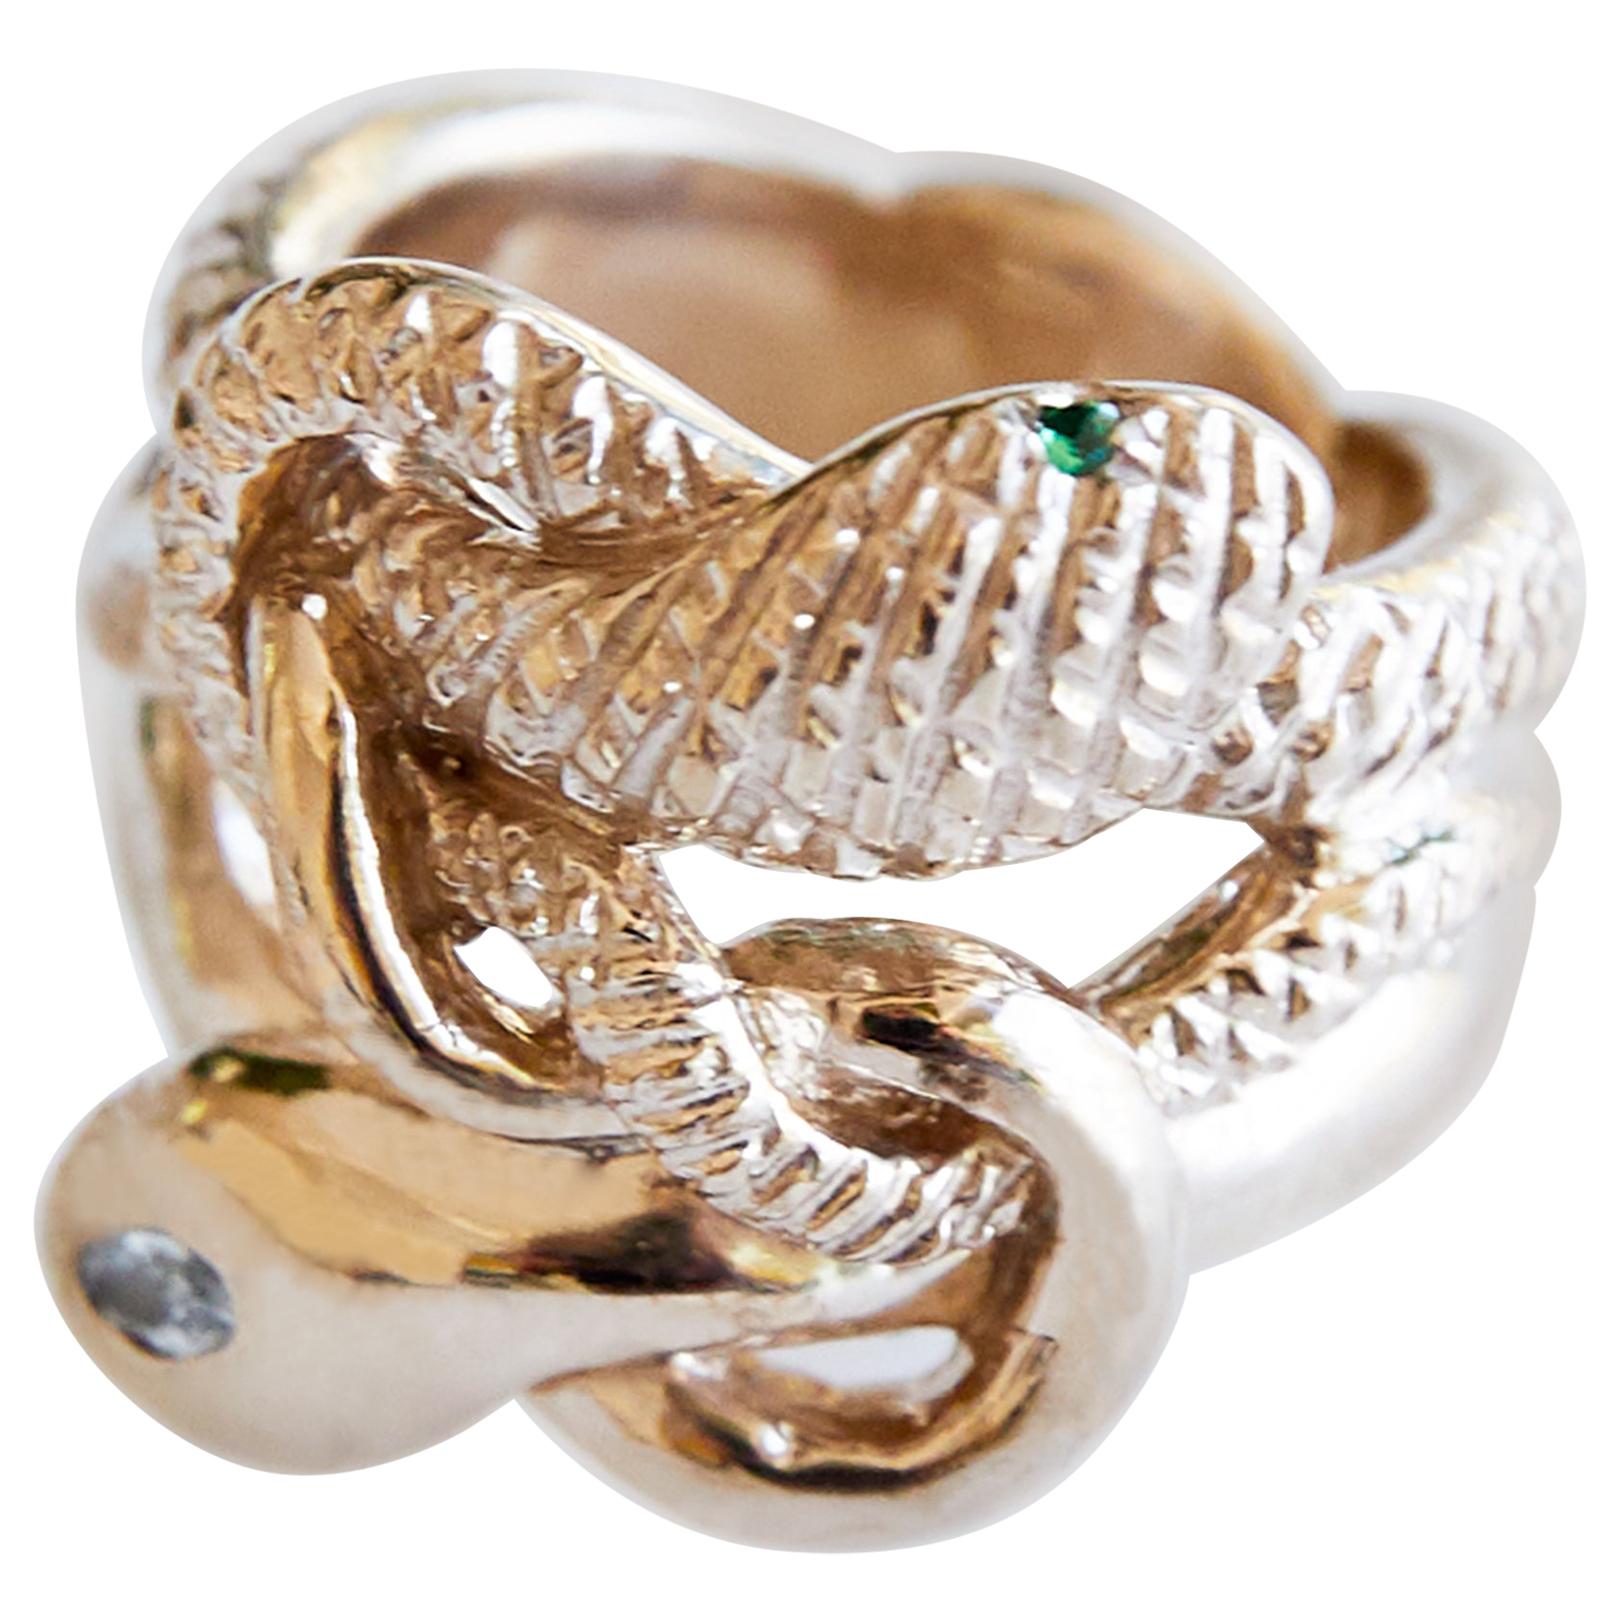 Sapphire Victorian Style Double Snake Ring Emerald Ruby Bronze J Dauphin

1 marquis Sapphire 2 pcs Emerald 2 pcs Ruby 
J DAUPHIN 